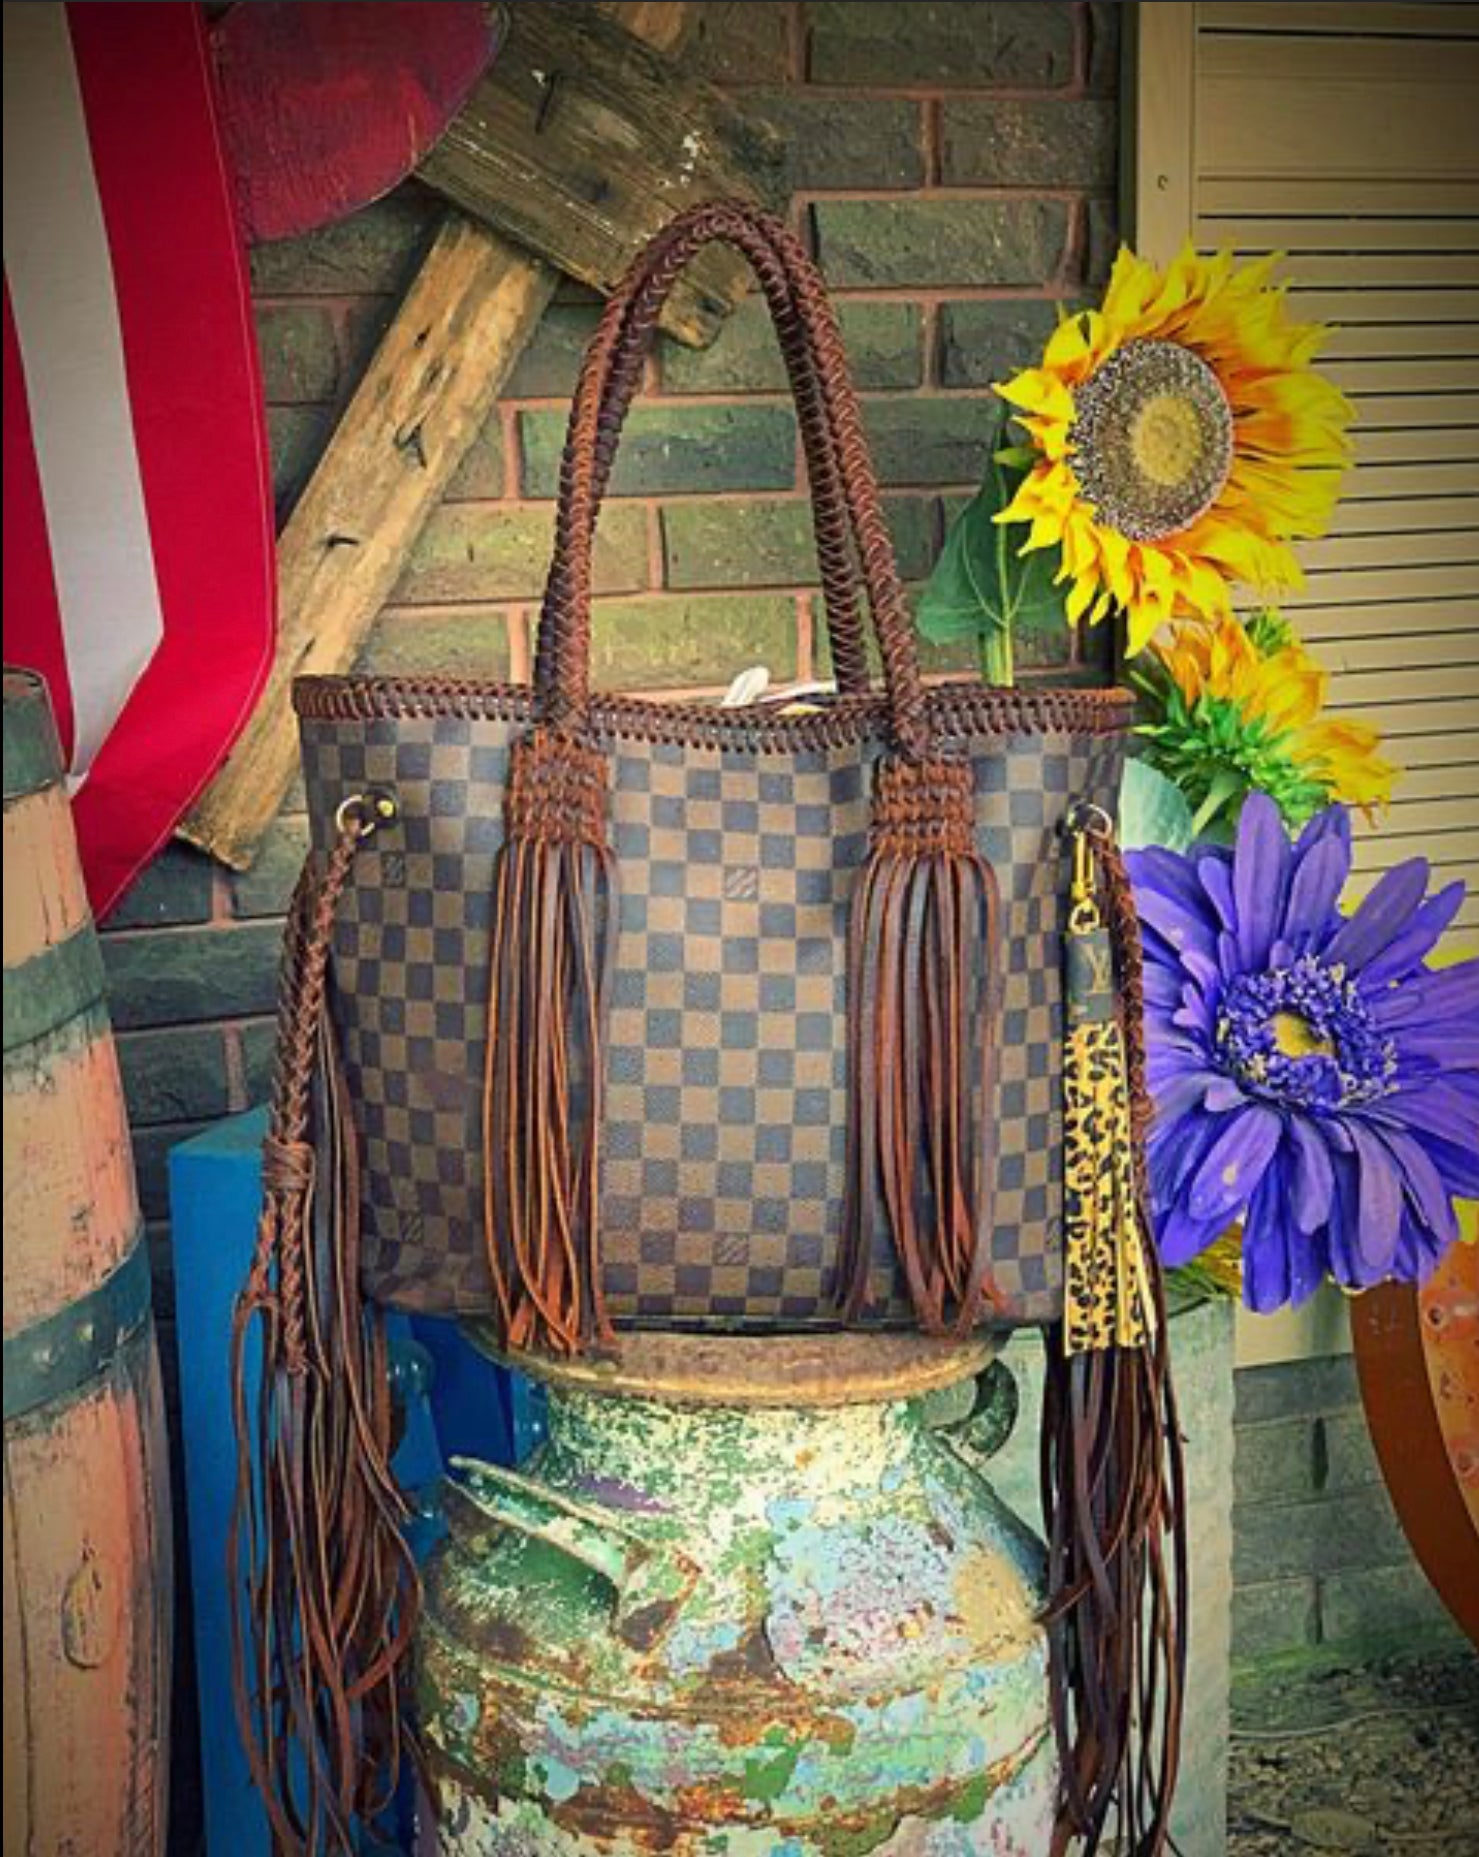 Louis Vuitton Neverfull PM Review!! 